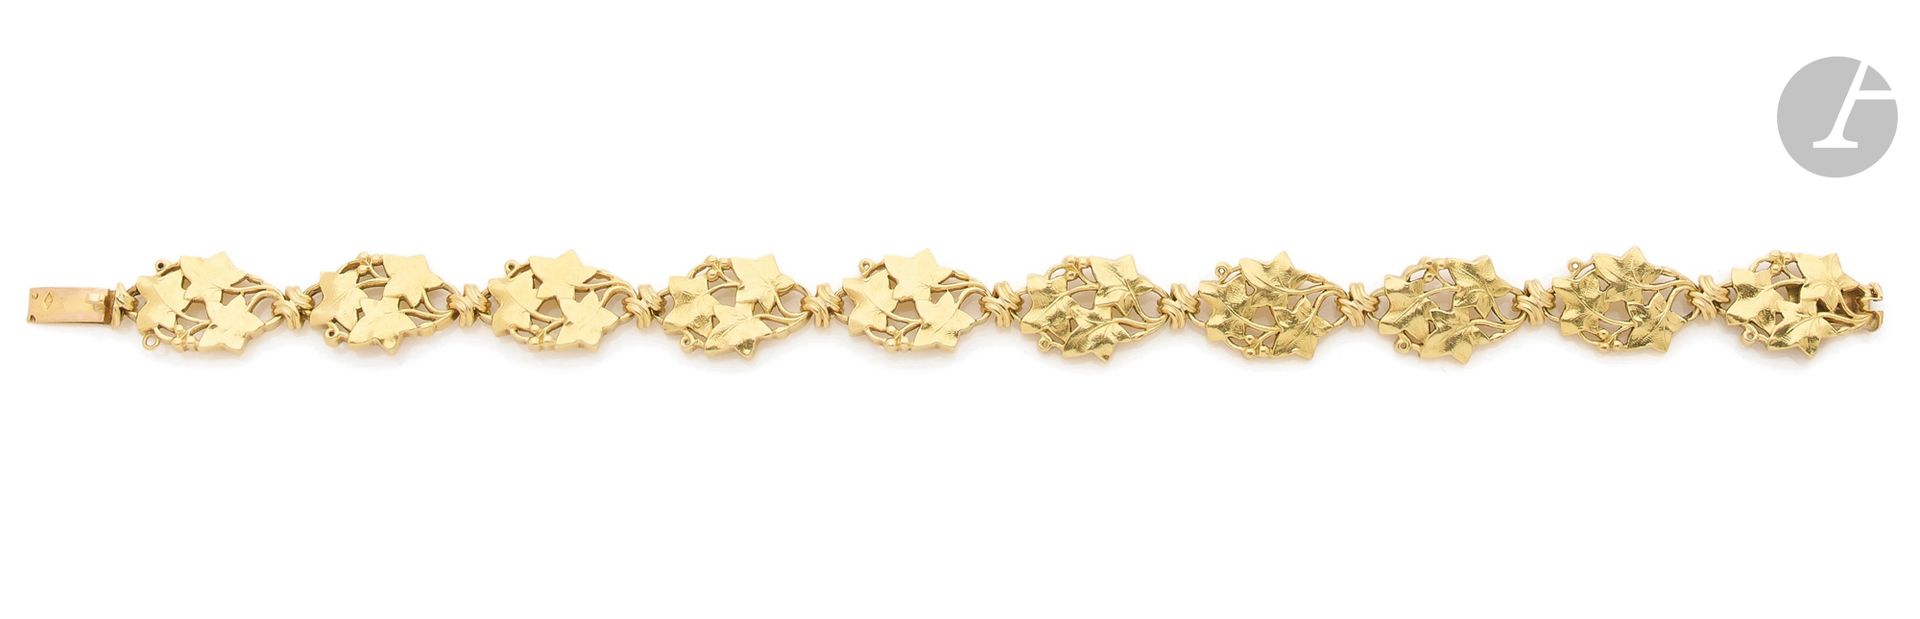 Null Gold bracelet 18K (750), articulated links pierced and chased ivy leaves. F&hellip;